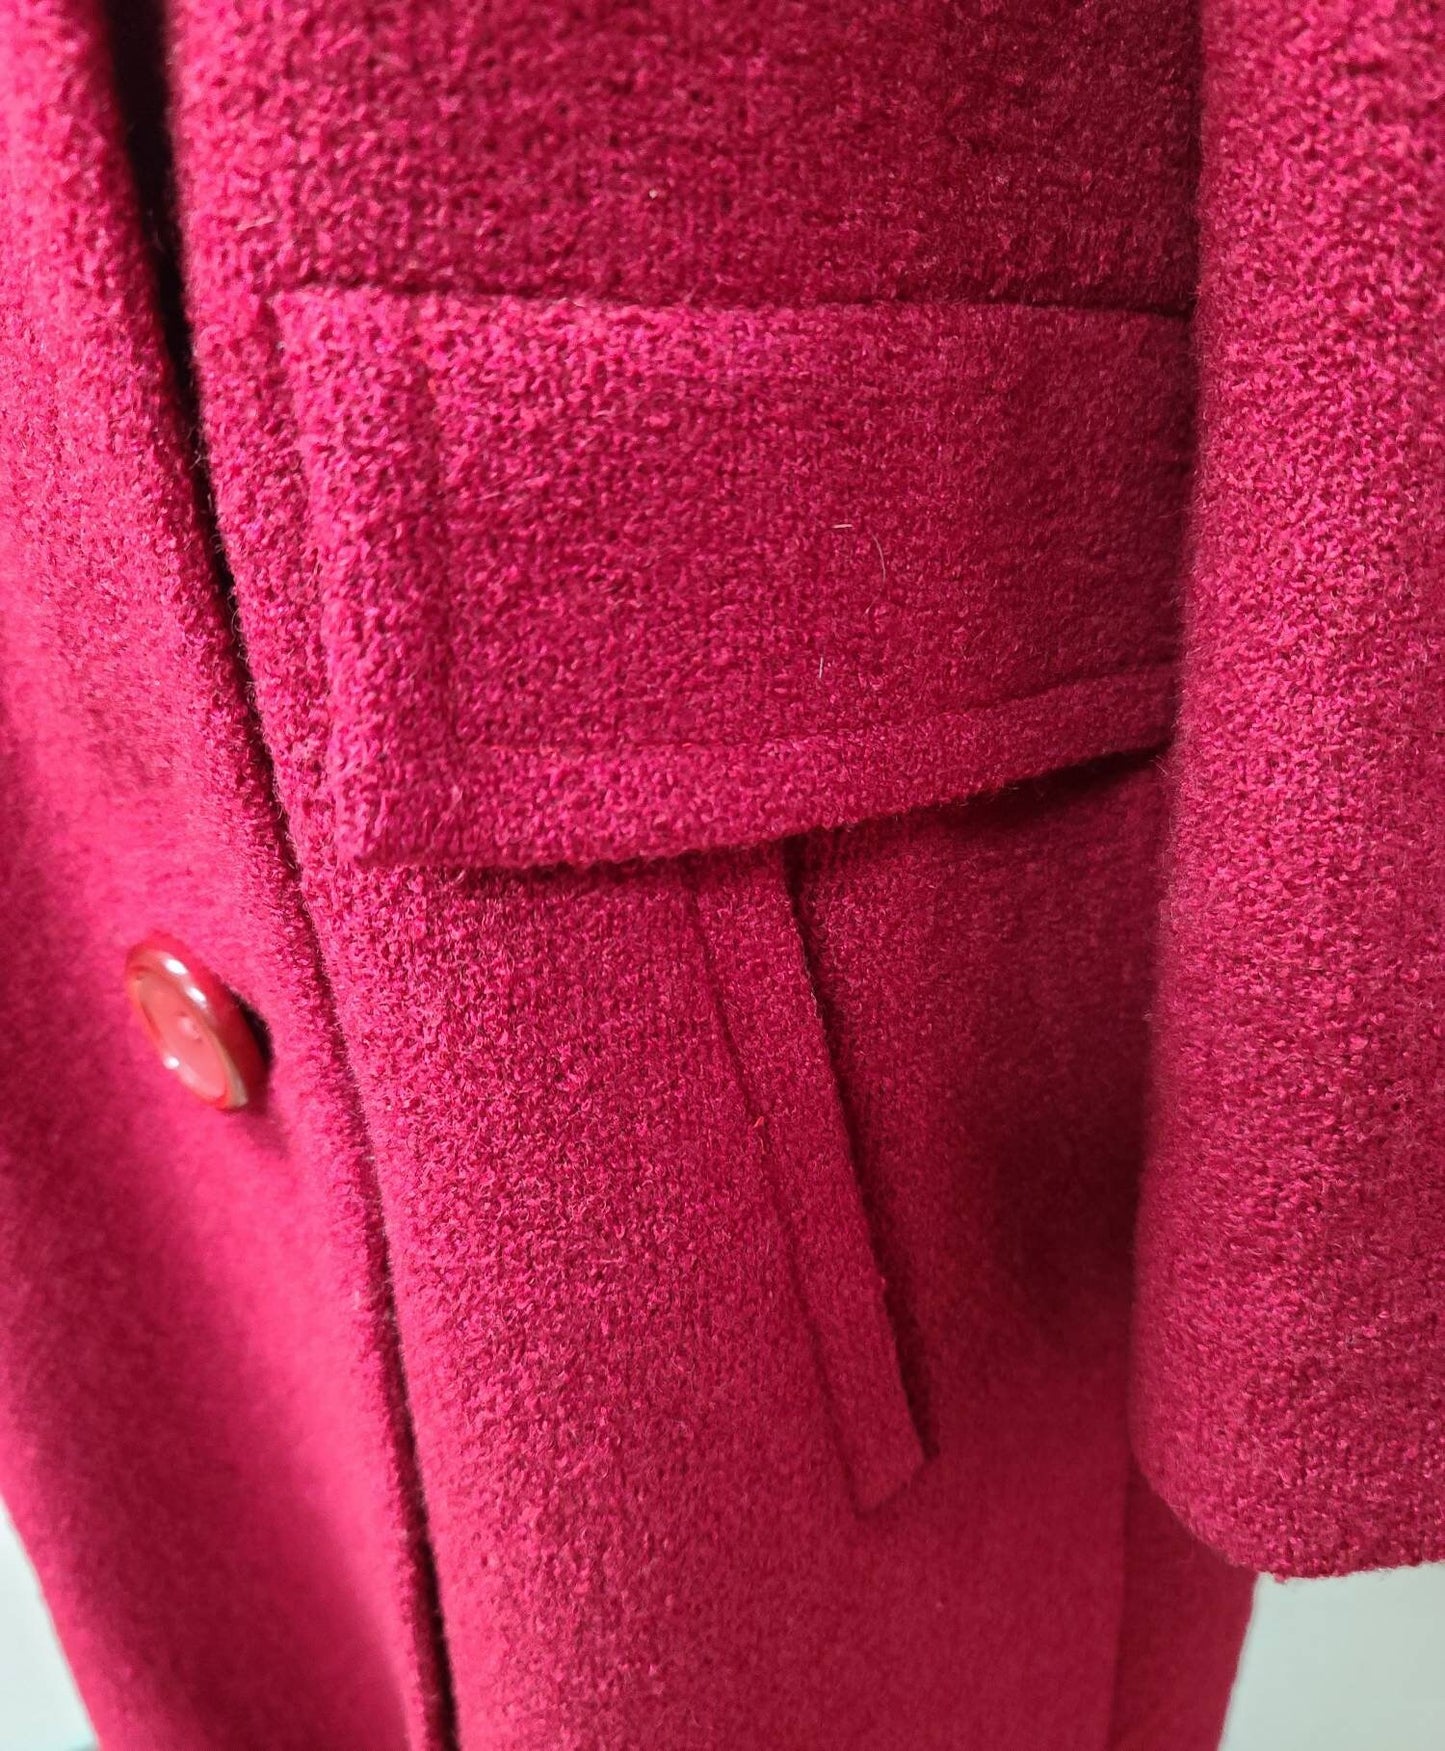 Vintage 1950s Coat Red Wool Coat Large Buttons Satin Lining Mid Century Rockabilly M L chest 40 in.